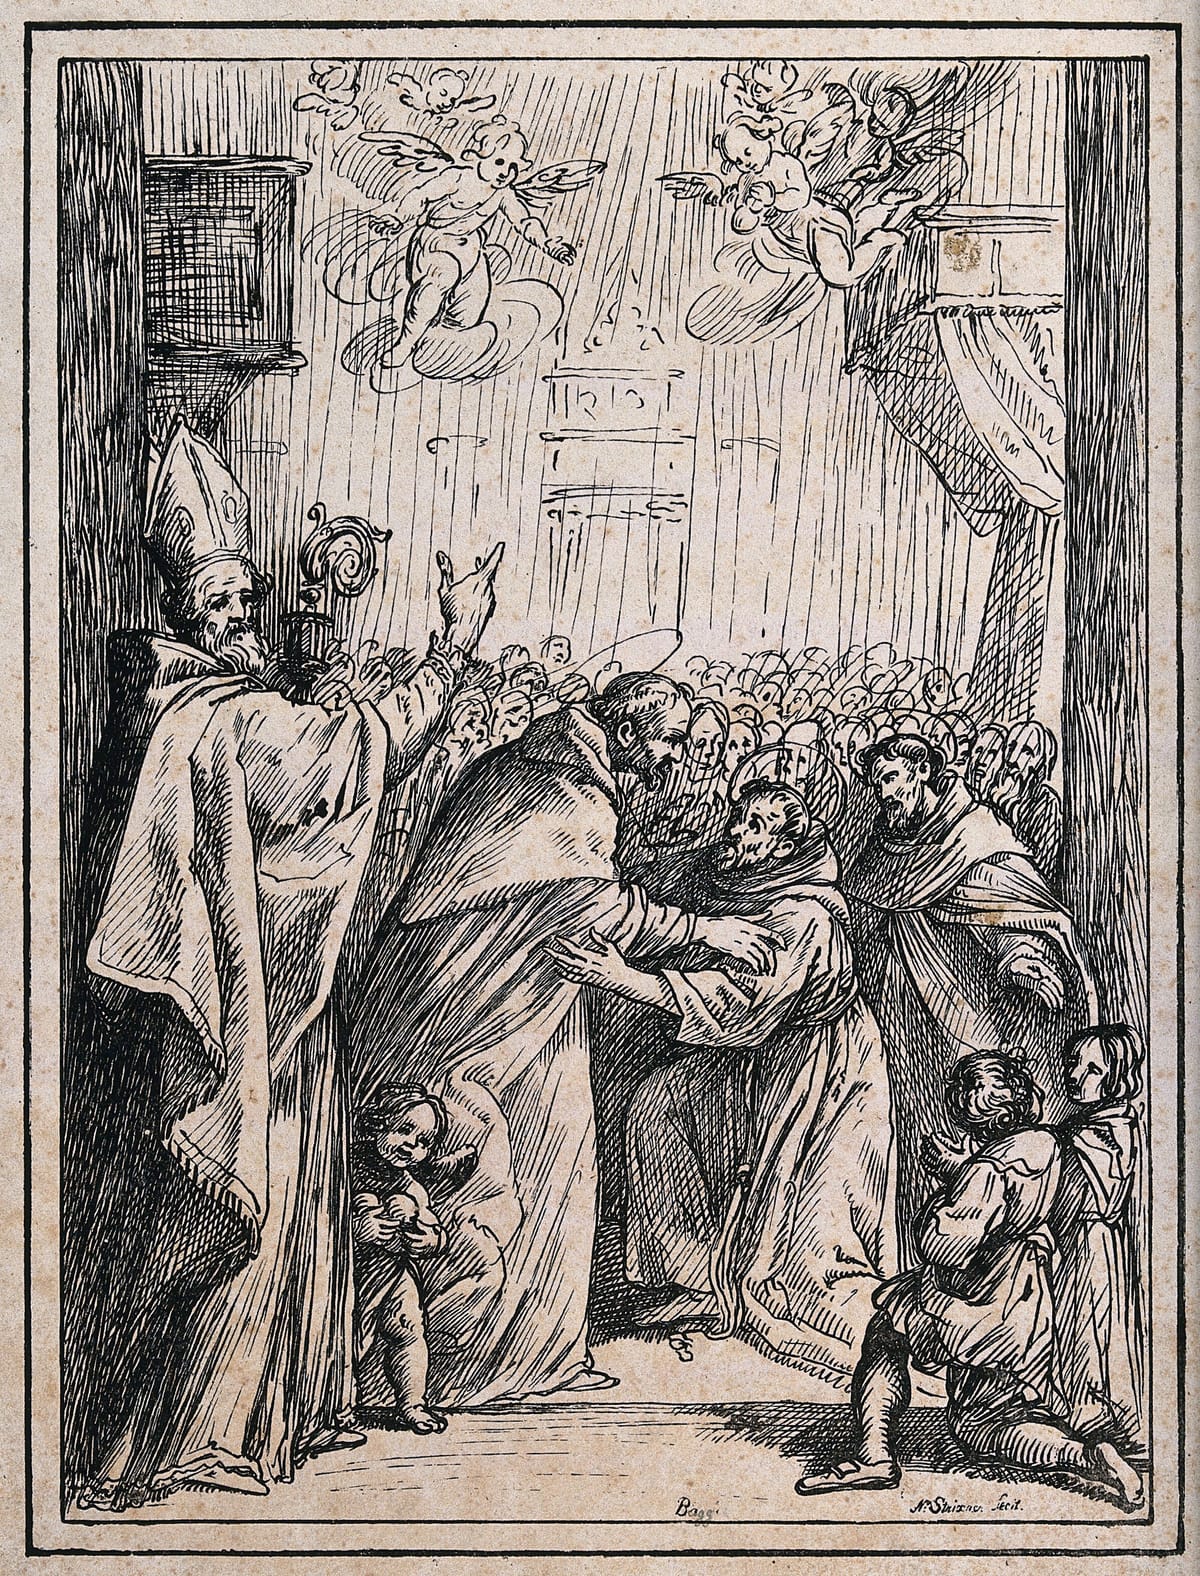 A bishop saint (Saint Nicholas?) with Saint Dominic Guzman (?) greeting two monk saints, surrounded by a crowd of onlookers (1811) by Giovanni Battista Paggi - Public Domain Catholic Drawing